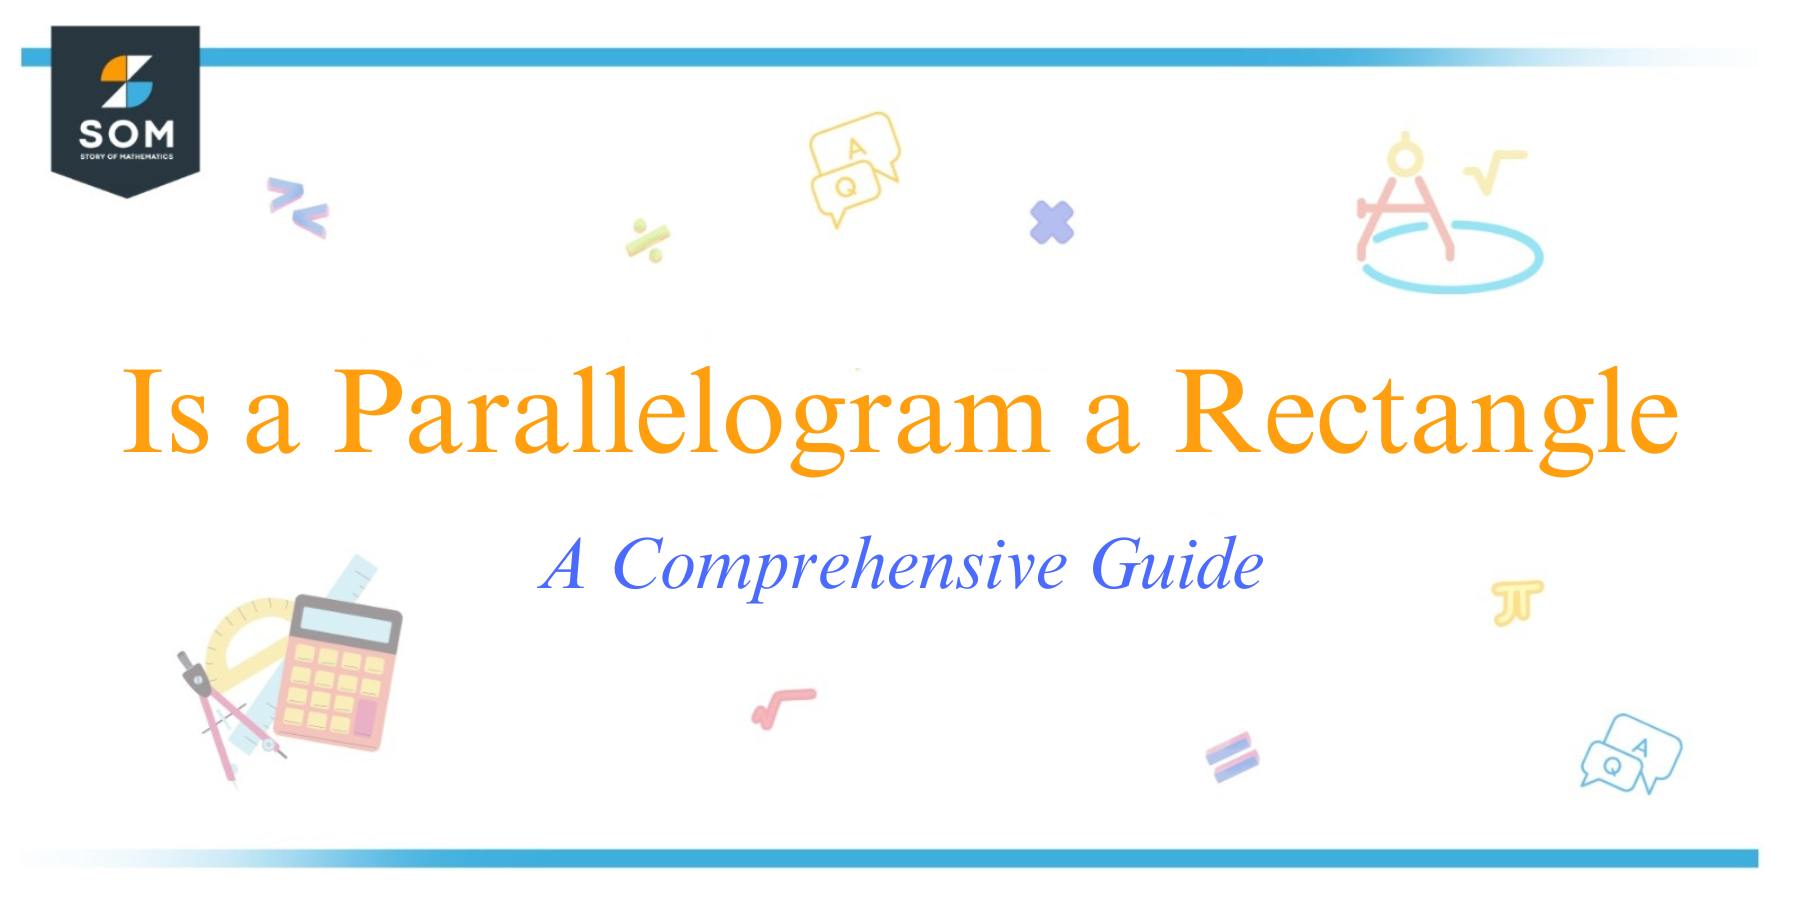 Is a Parallelogram a Rectangle A Comprehensive Guide